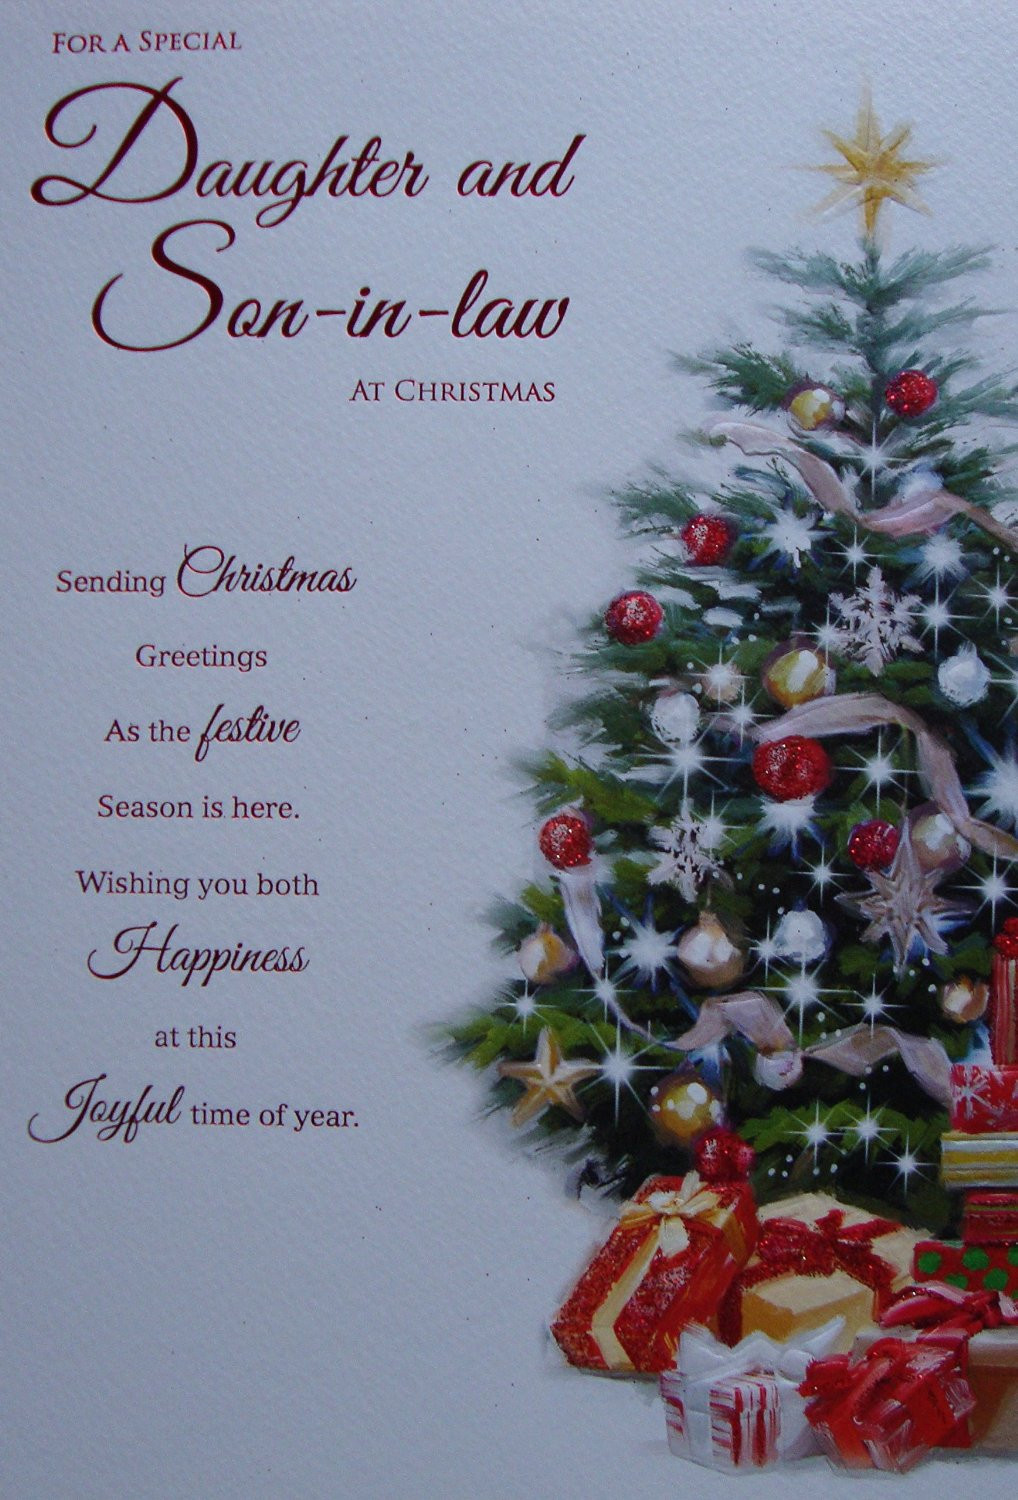 Christmas Gift Ideas For Daughters In Law
 For a Special Daughter And Son In Law Christmas Card